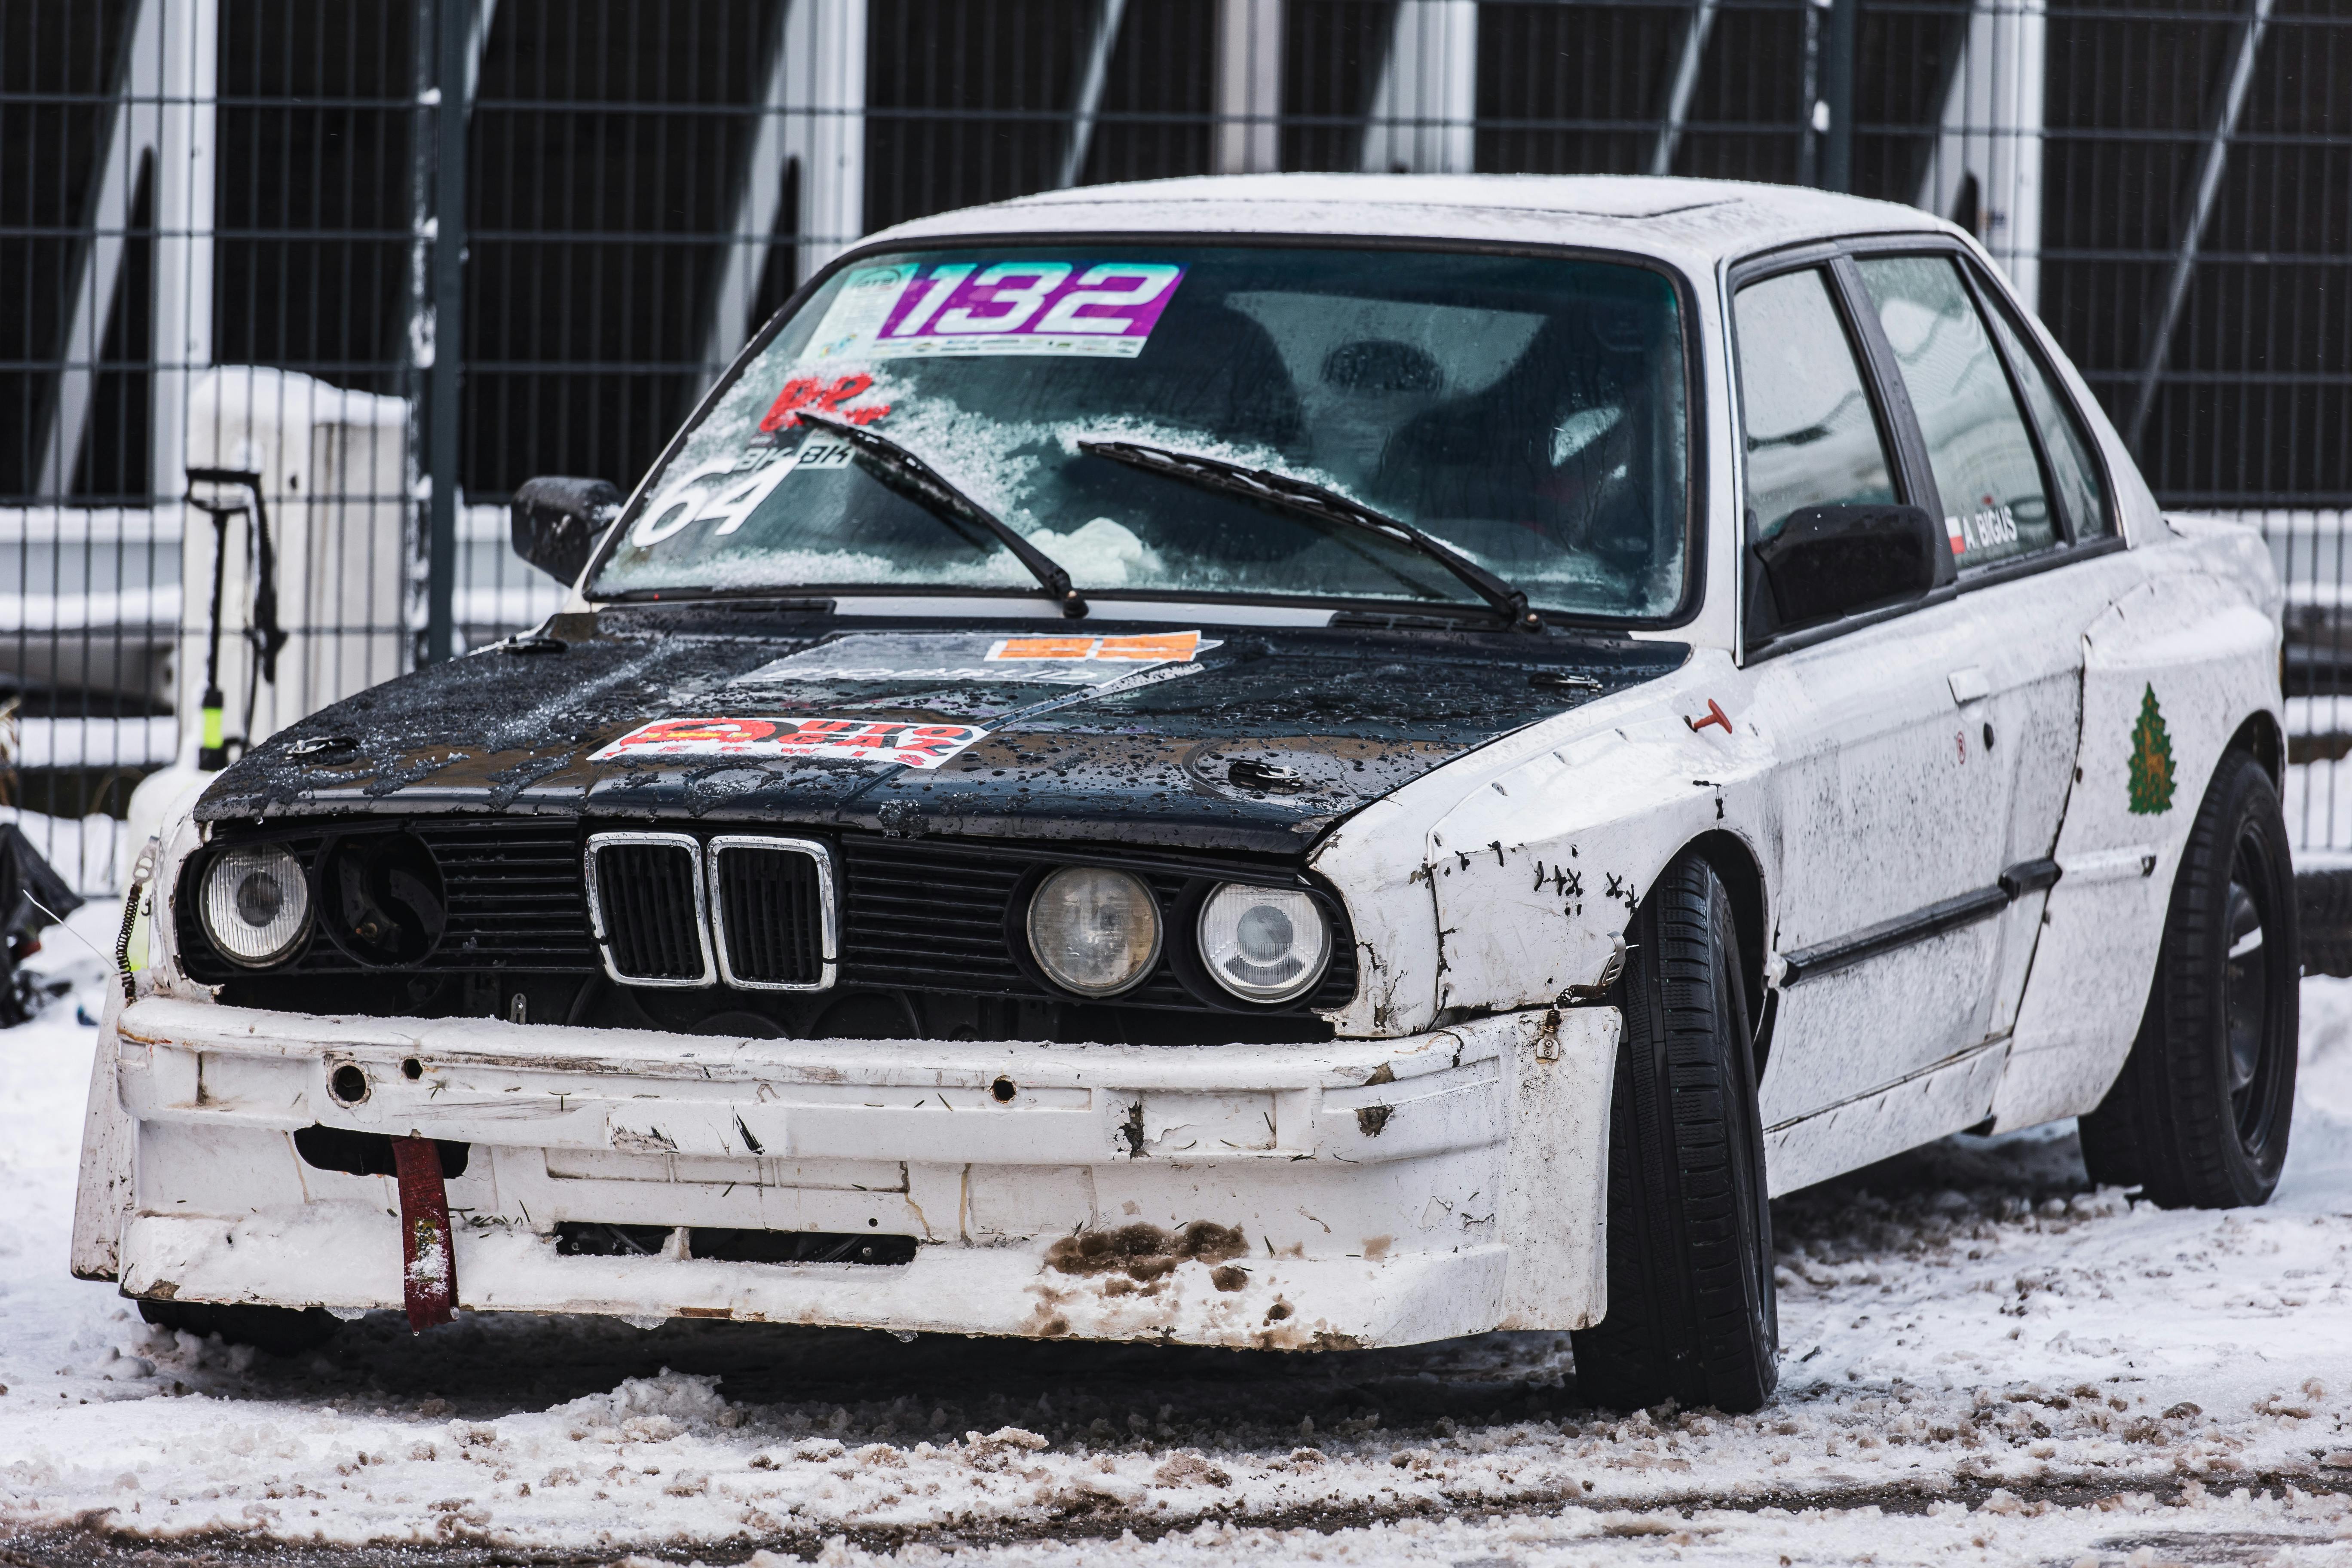 Close-up of a Race Car Drifting at a Race Track · Free Stock Photo